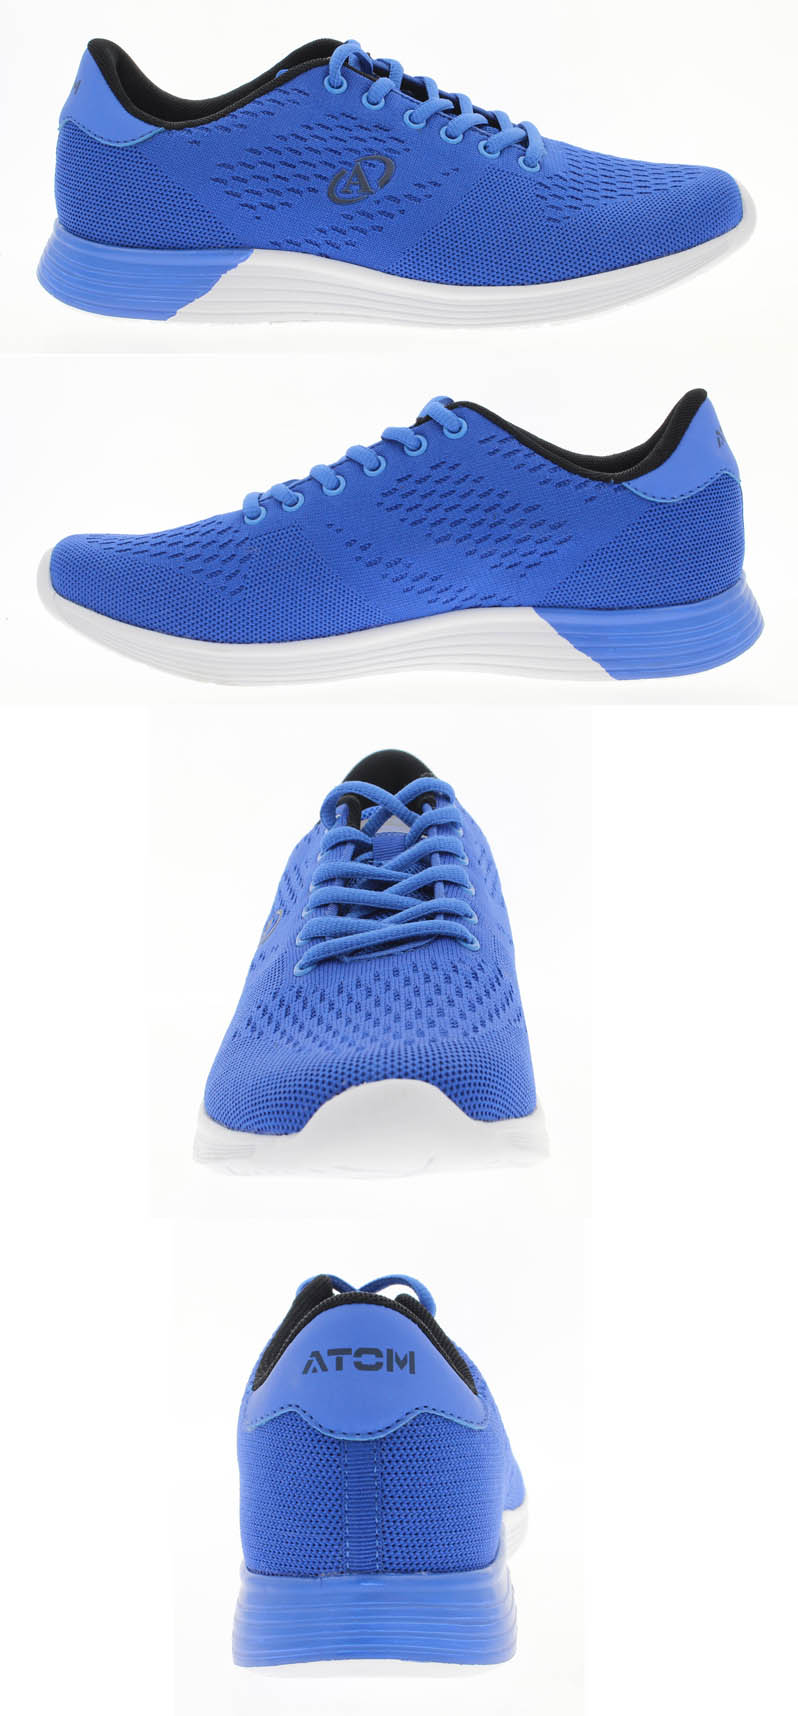 Royal blue flykniting shoes 